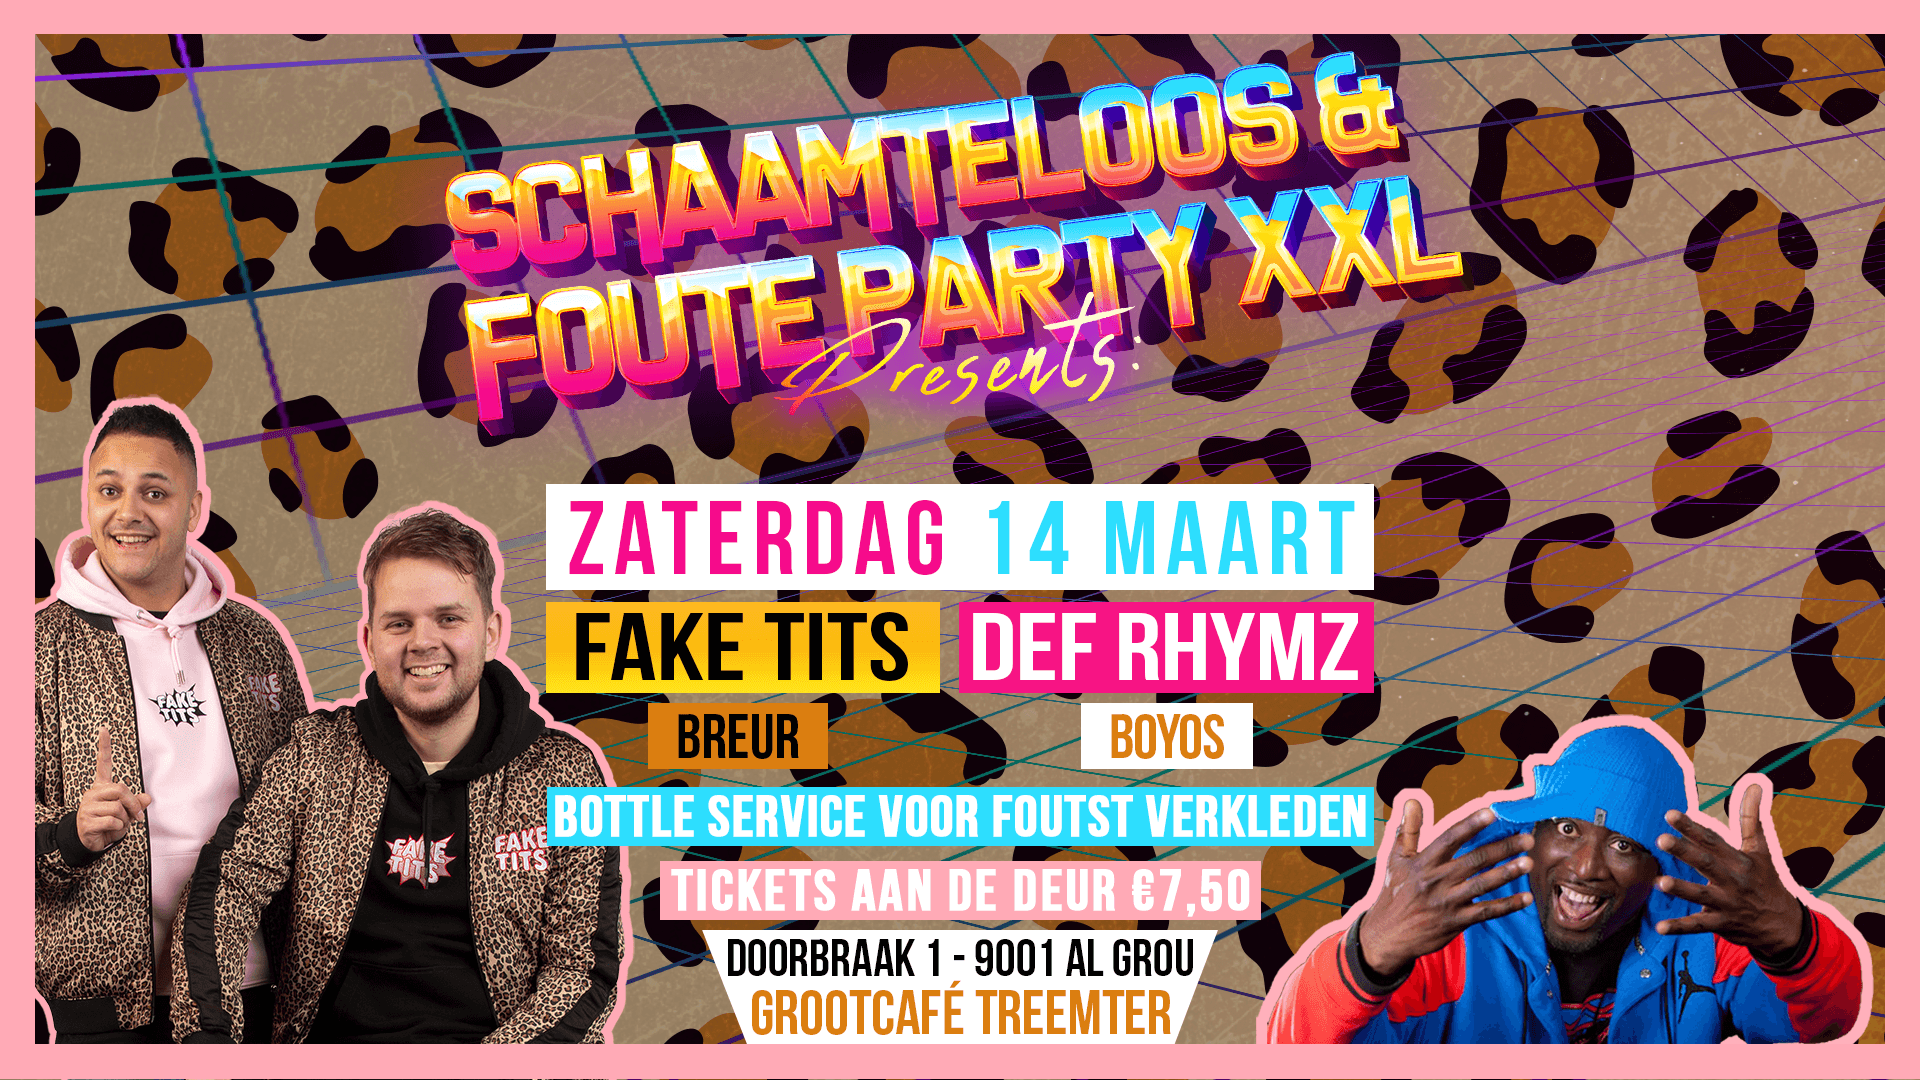 Schaamteloos & Foute Party XXL Presents: Def Rhymz // Fake Tits